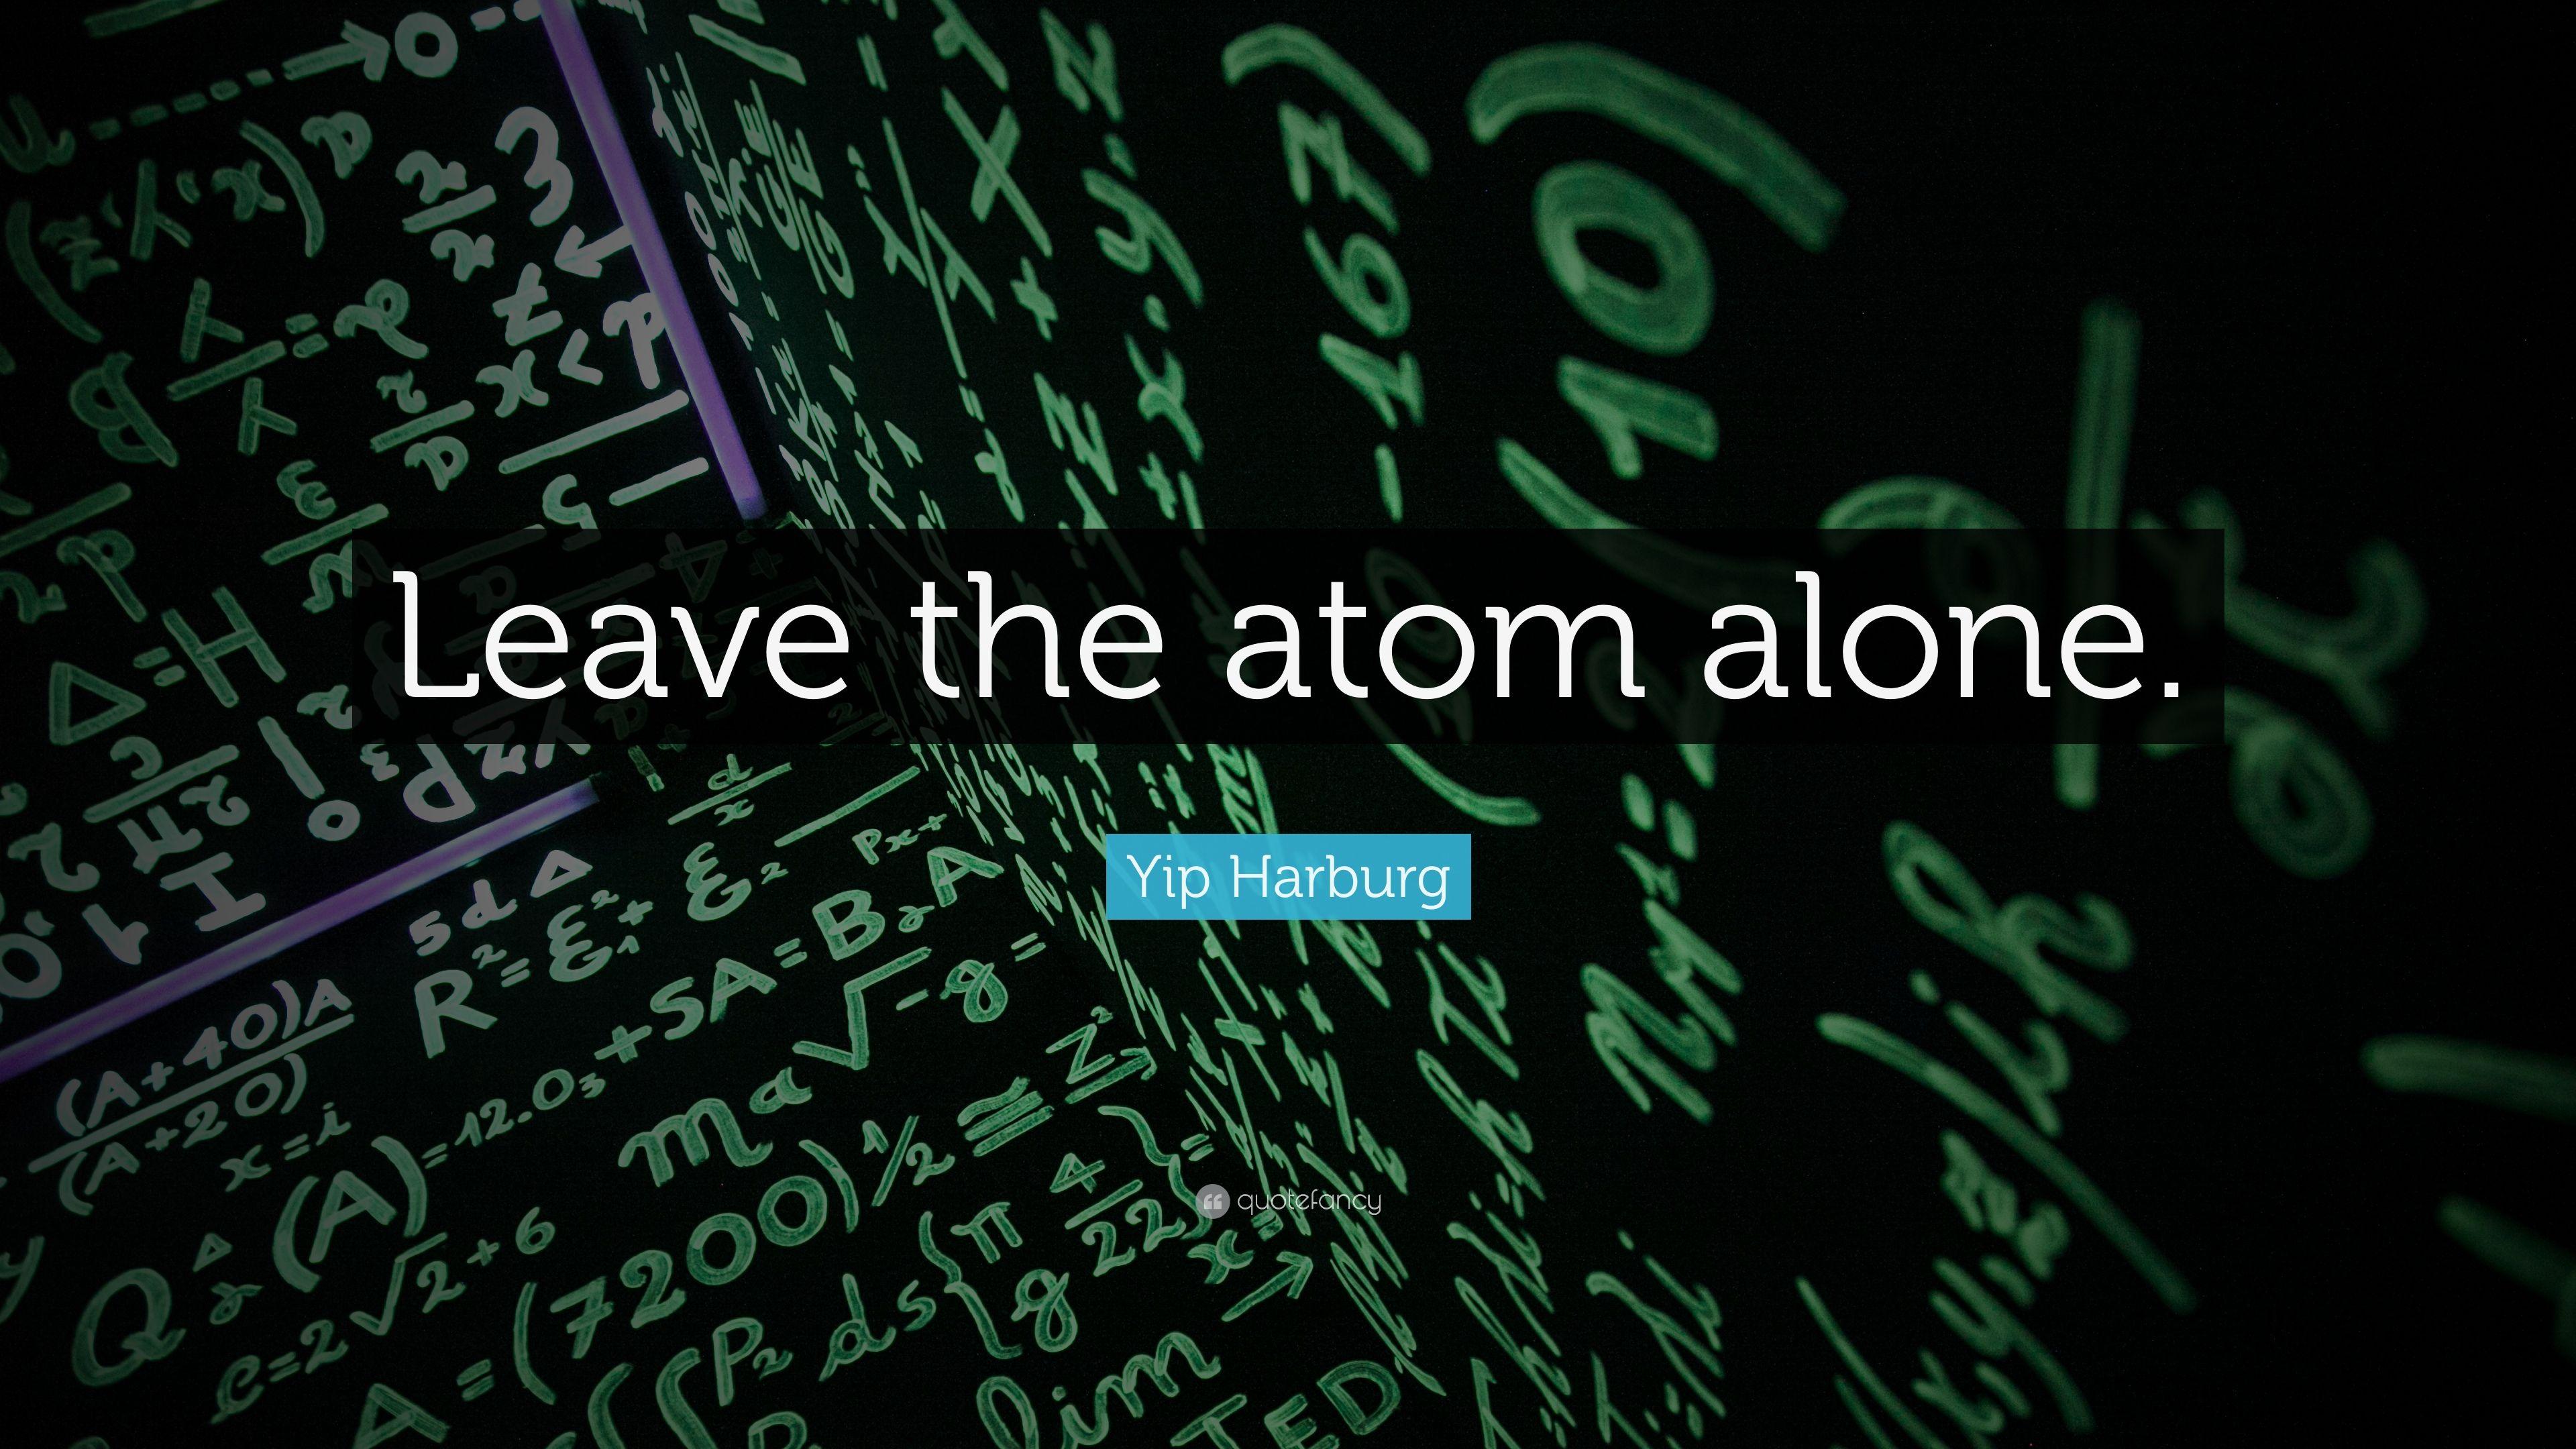 Yip Harburg Quote: “Leave the atom alone.” (7 wallpaper)